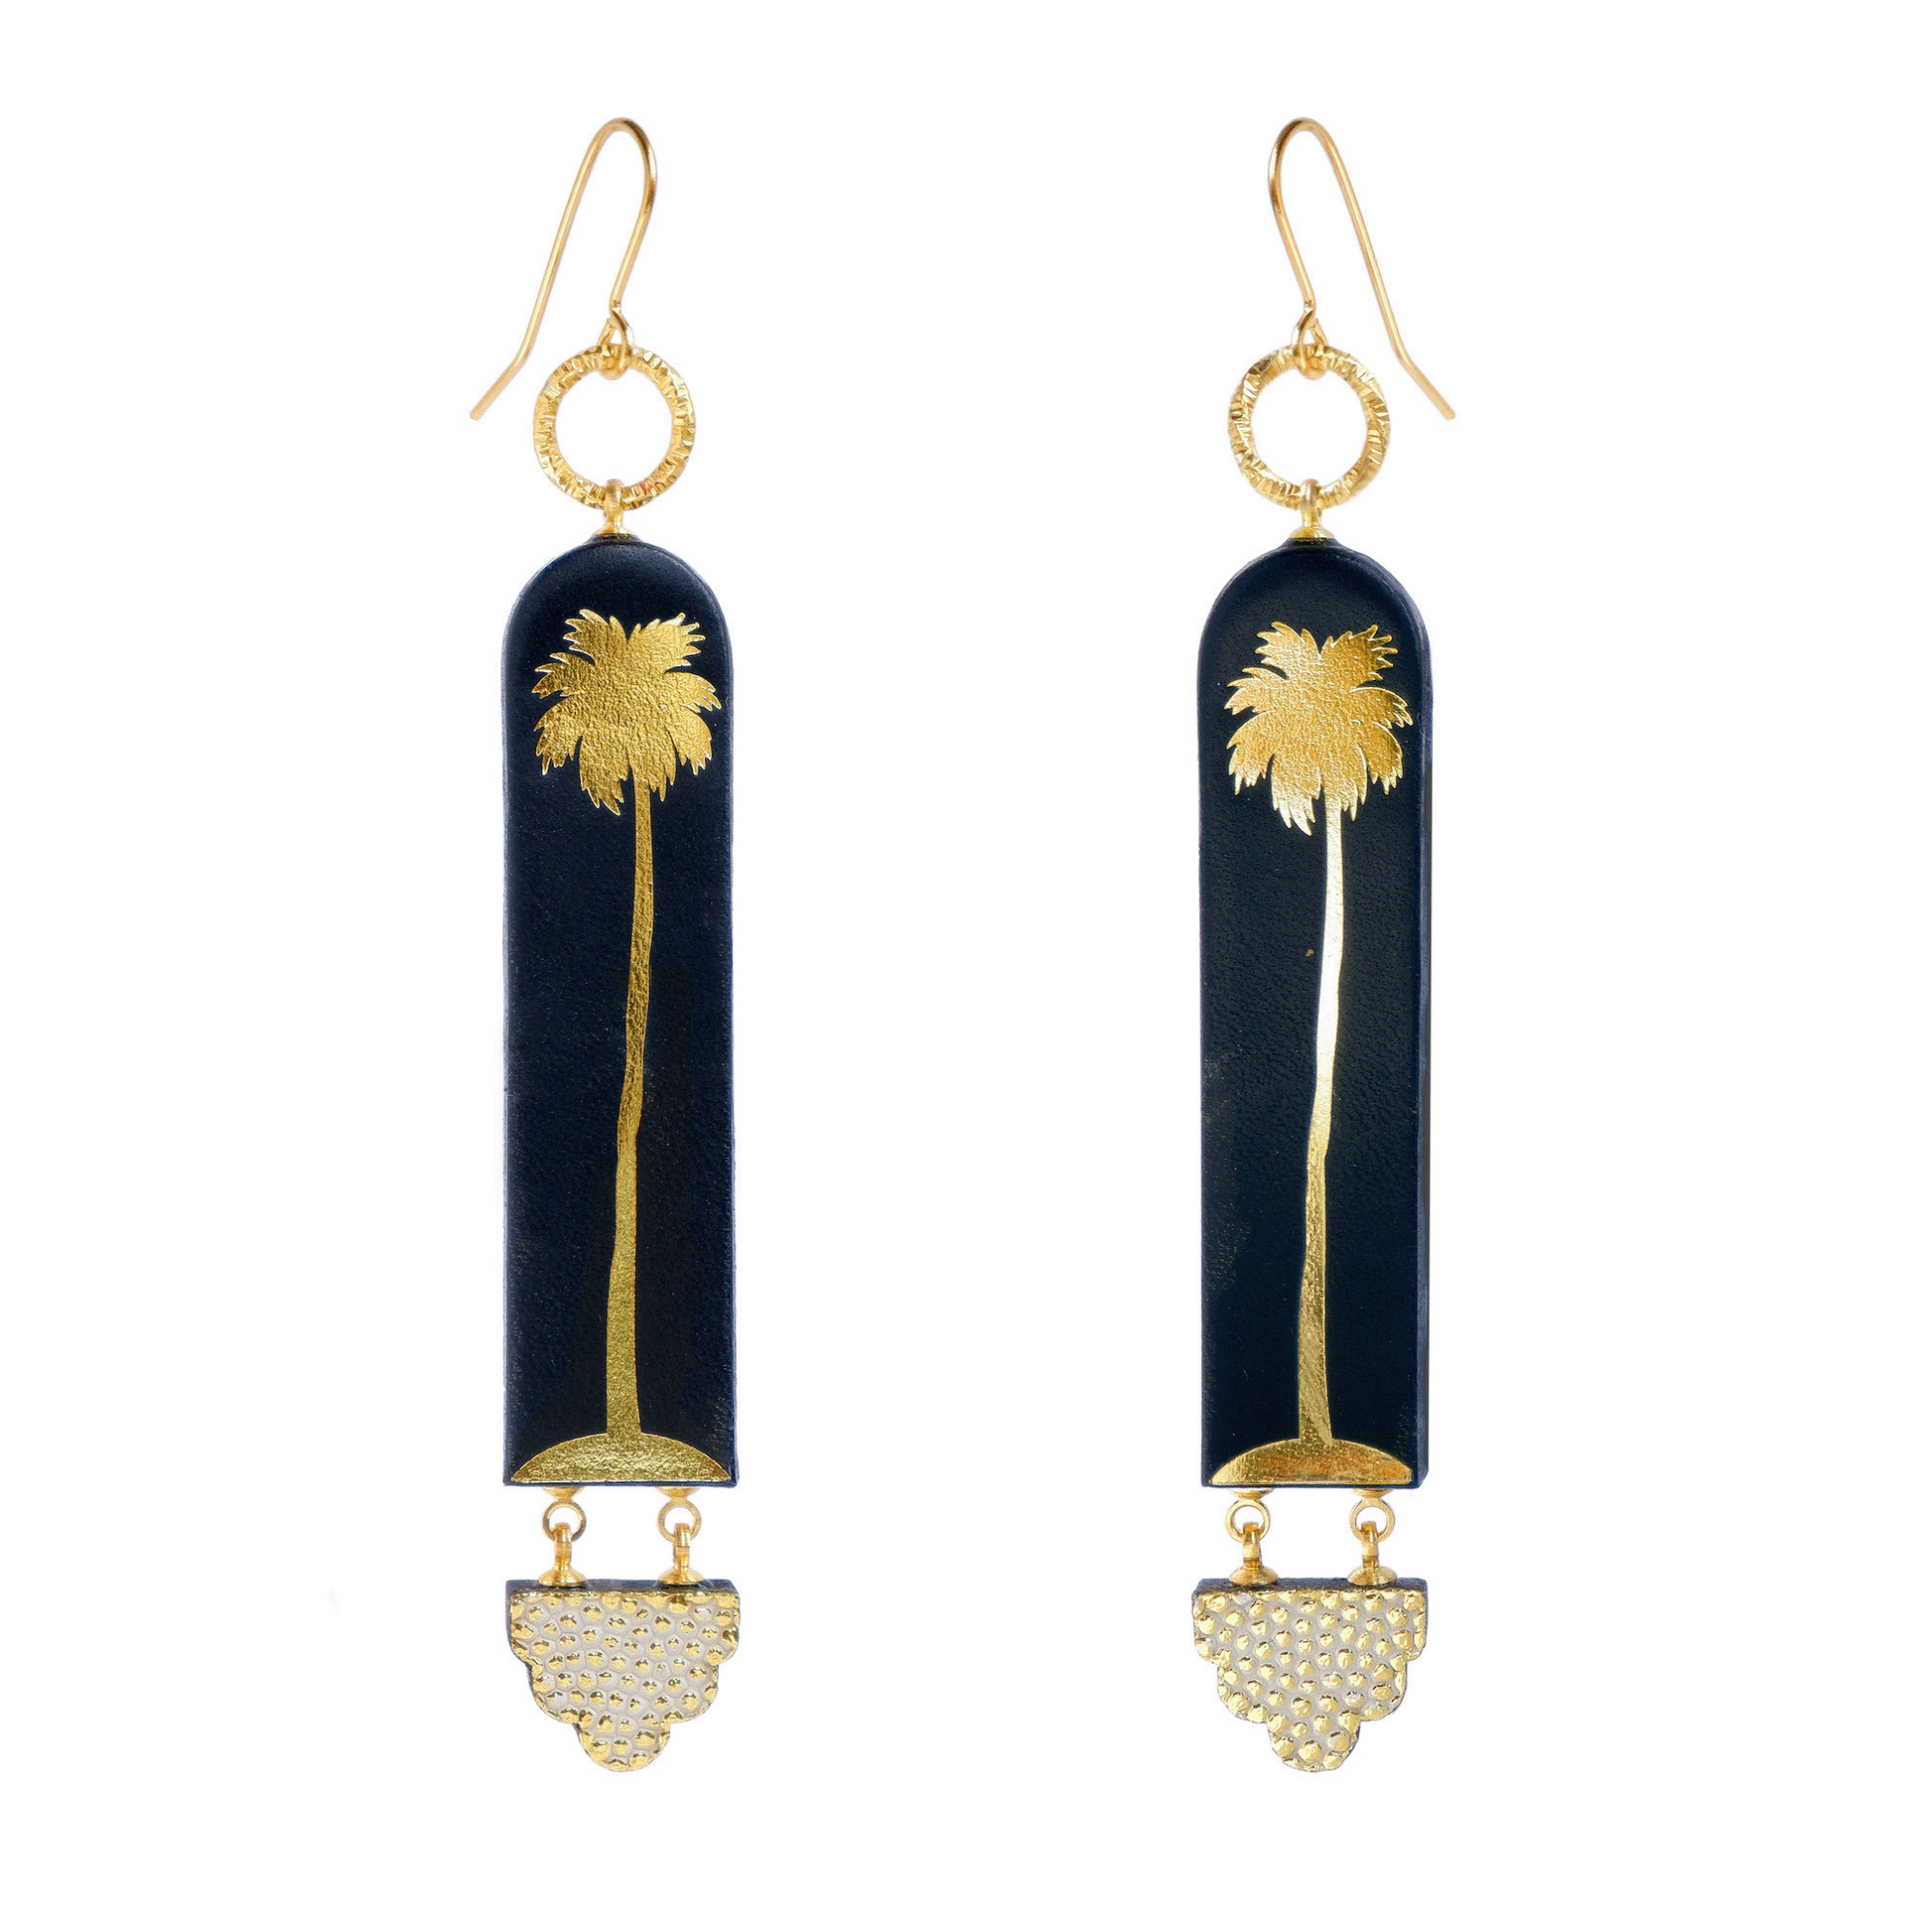 long drop hook earrings - arched strips in leather, printed with gold palm trees - animated gif showing different colour options